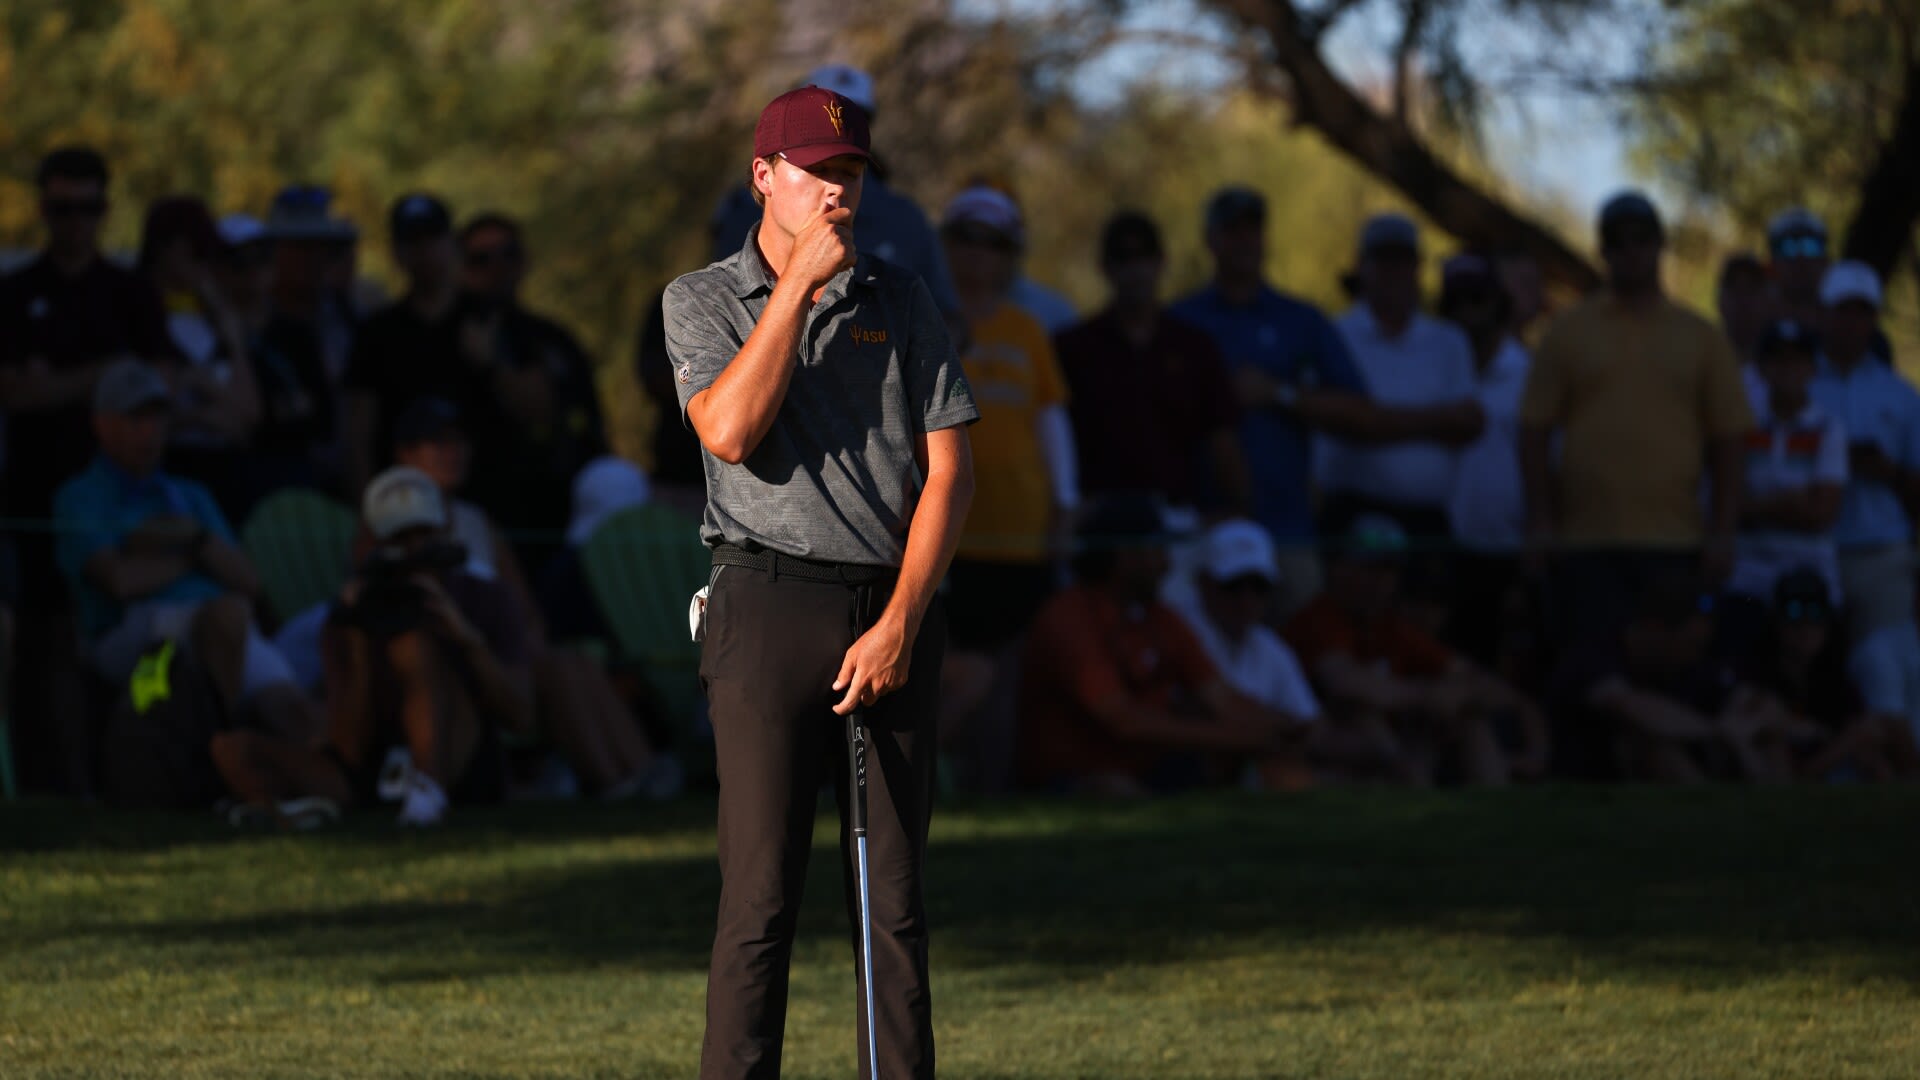 Arizona State coach reflects on 'hard lesson' after shocking NCAA regional exit